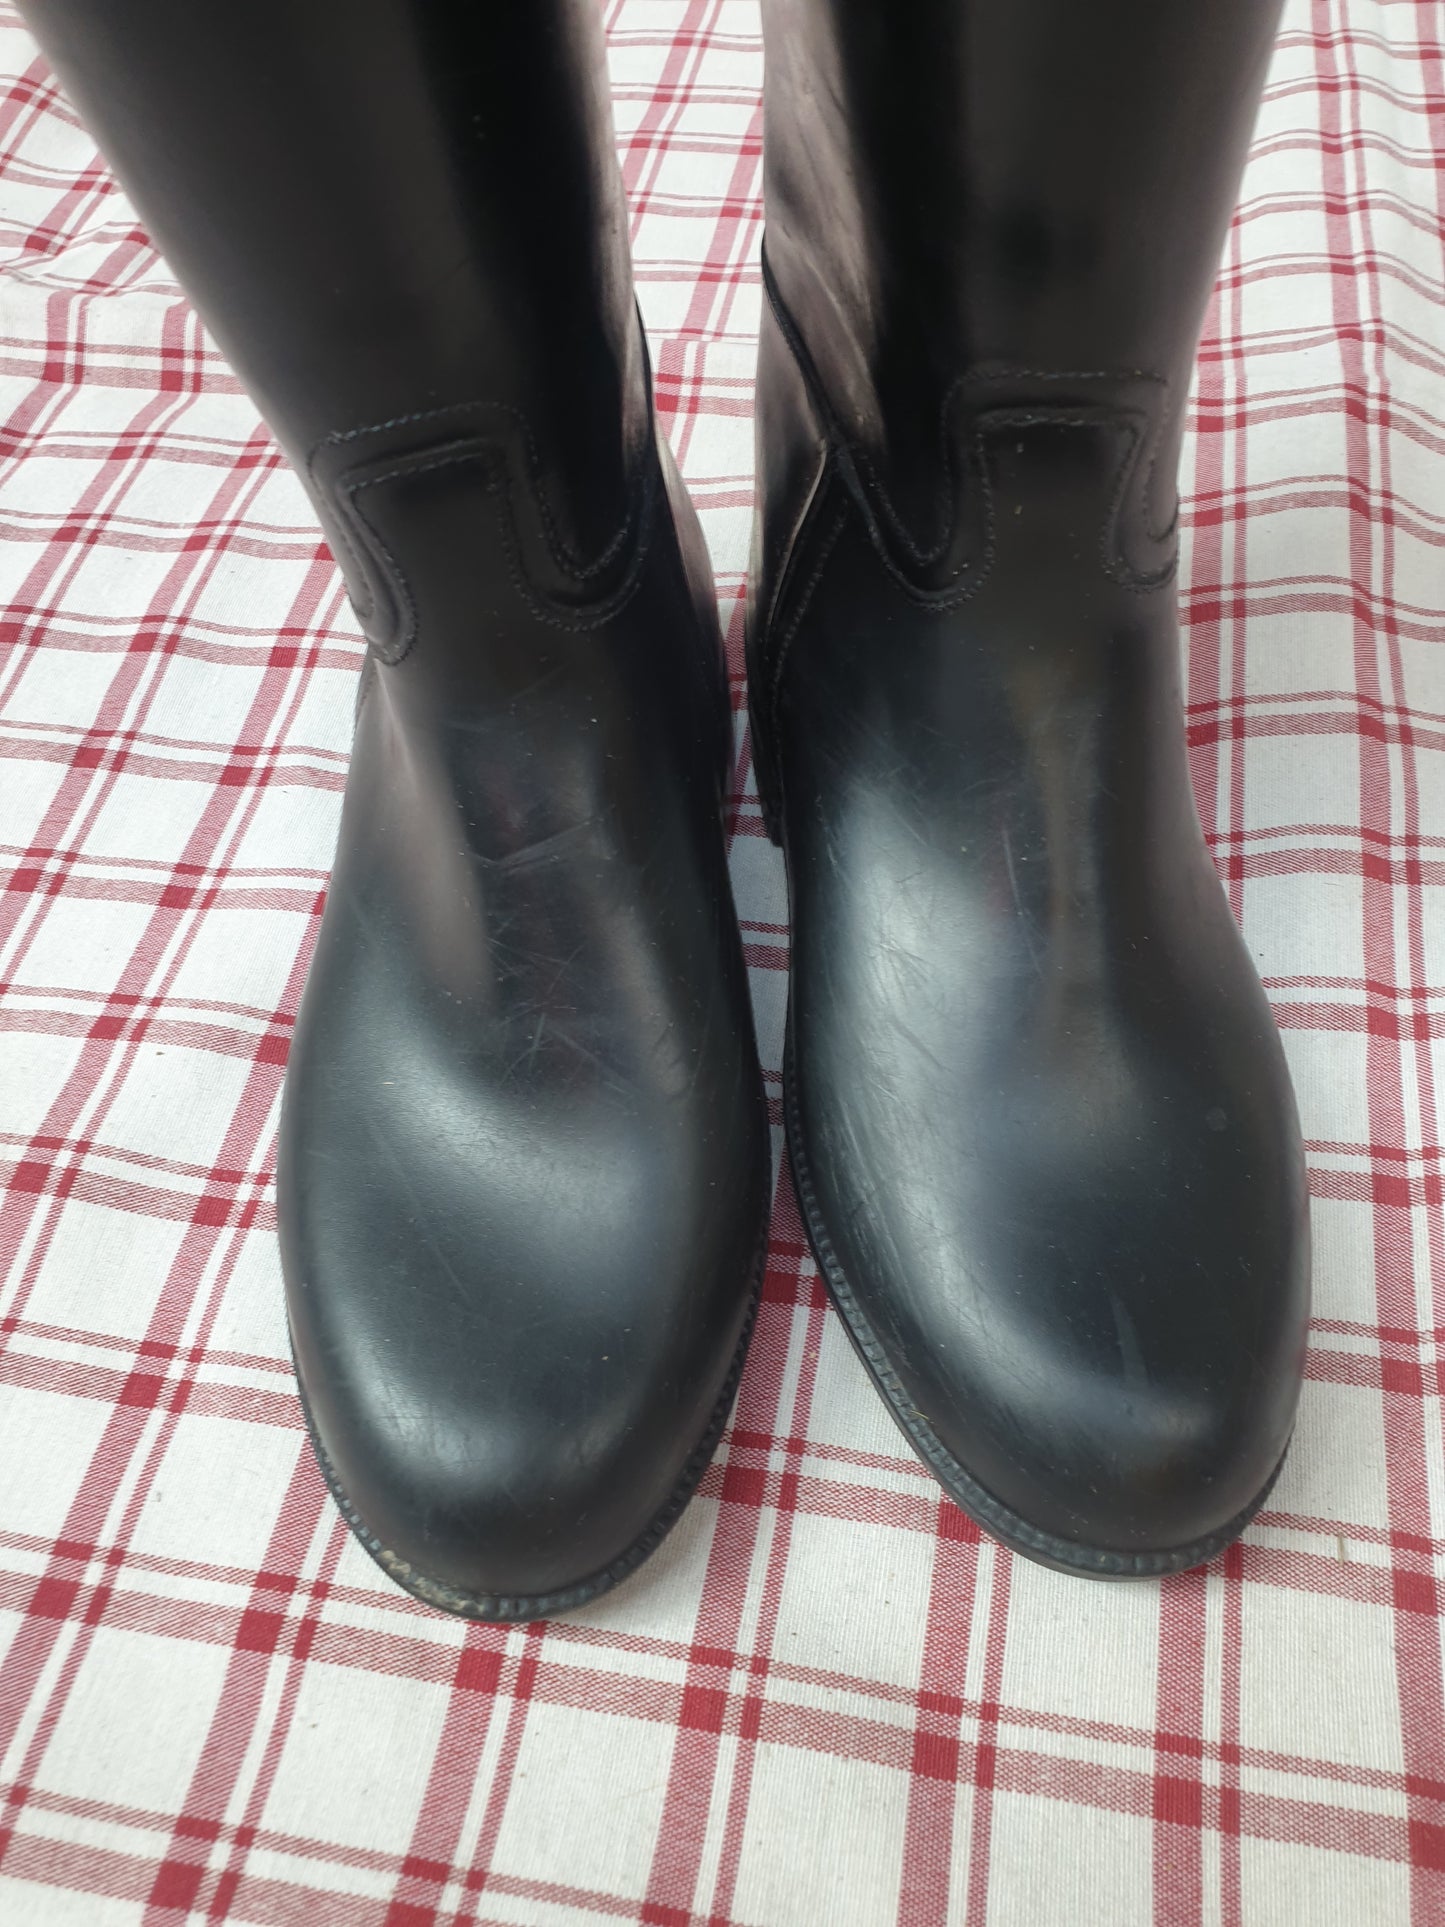 Long rubber riding boots, black, used, kids size 13 FREE POSTAGE *